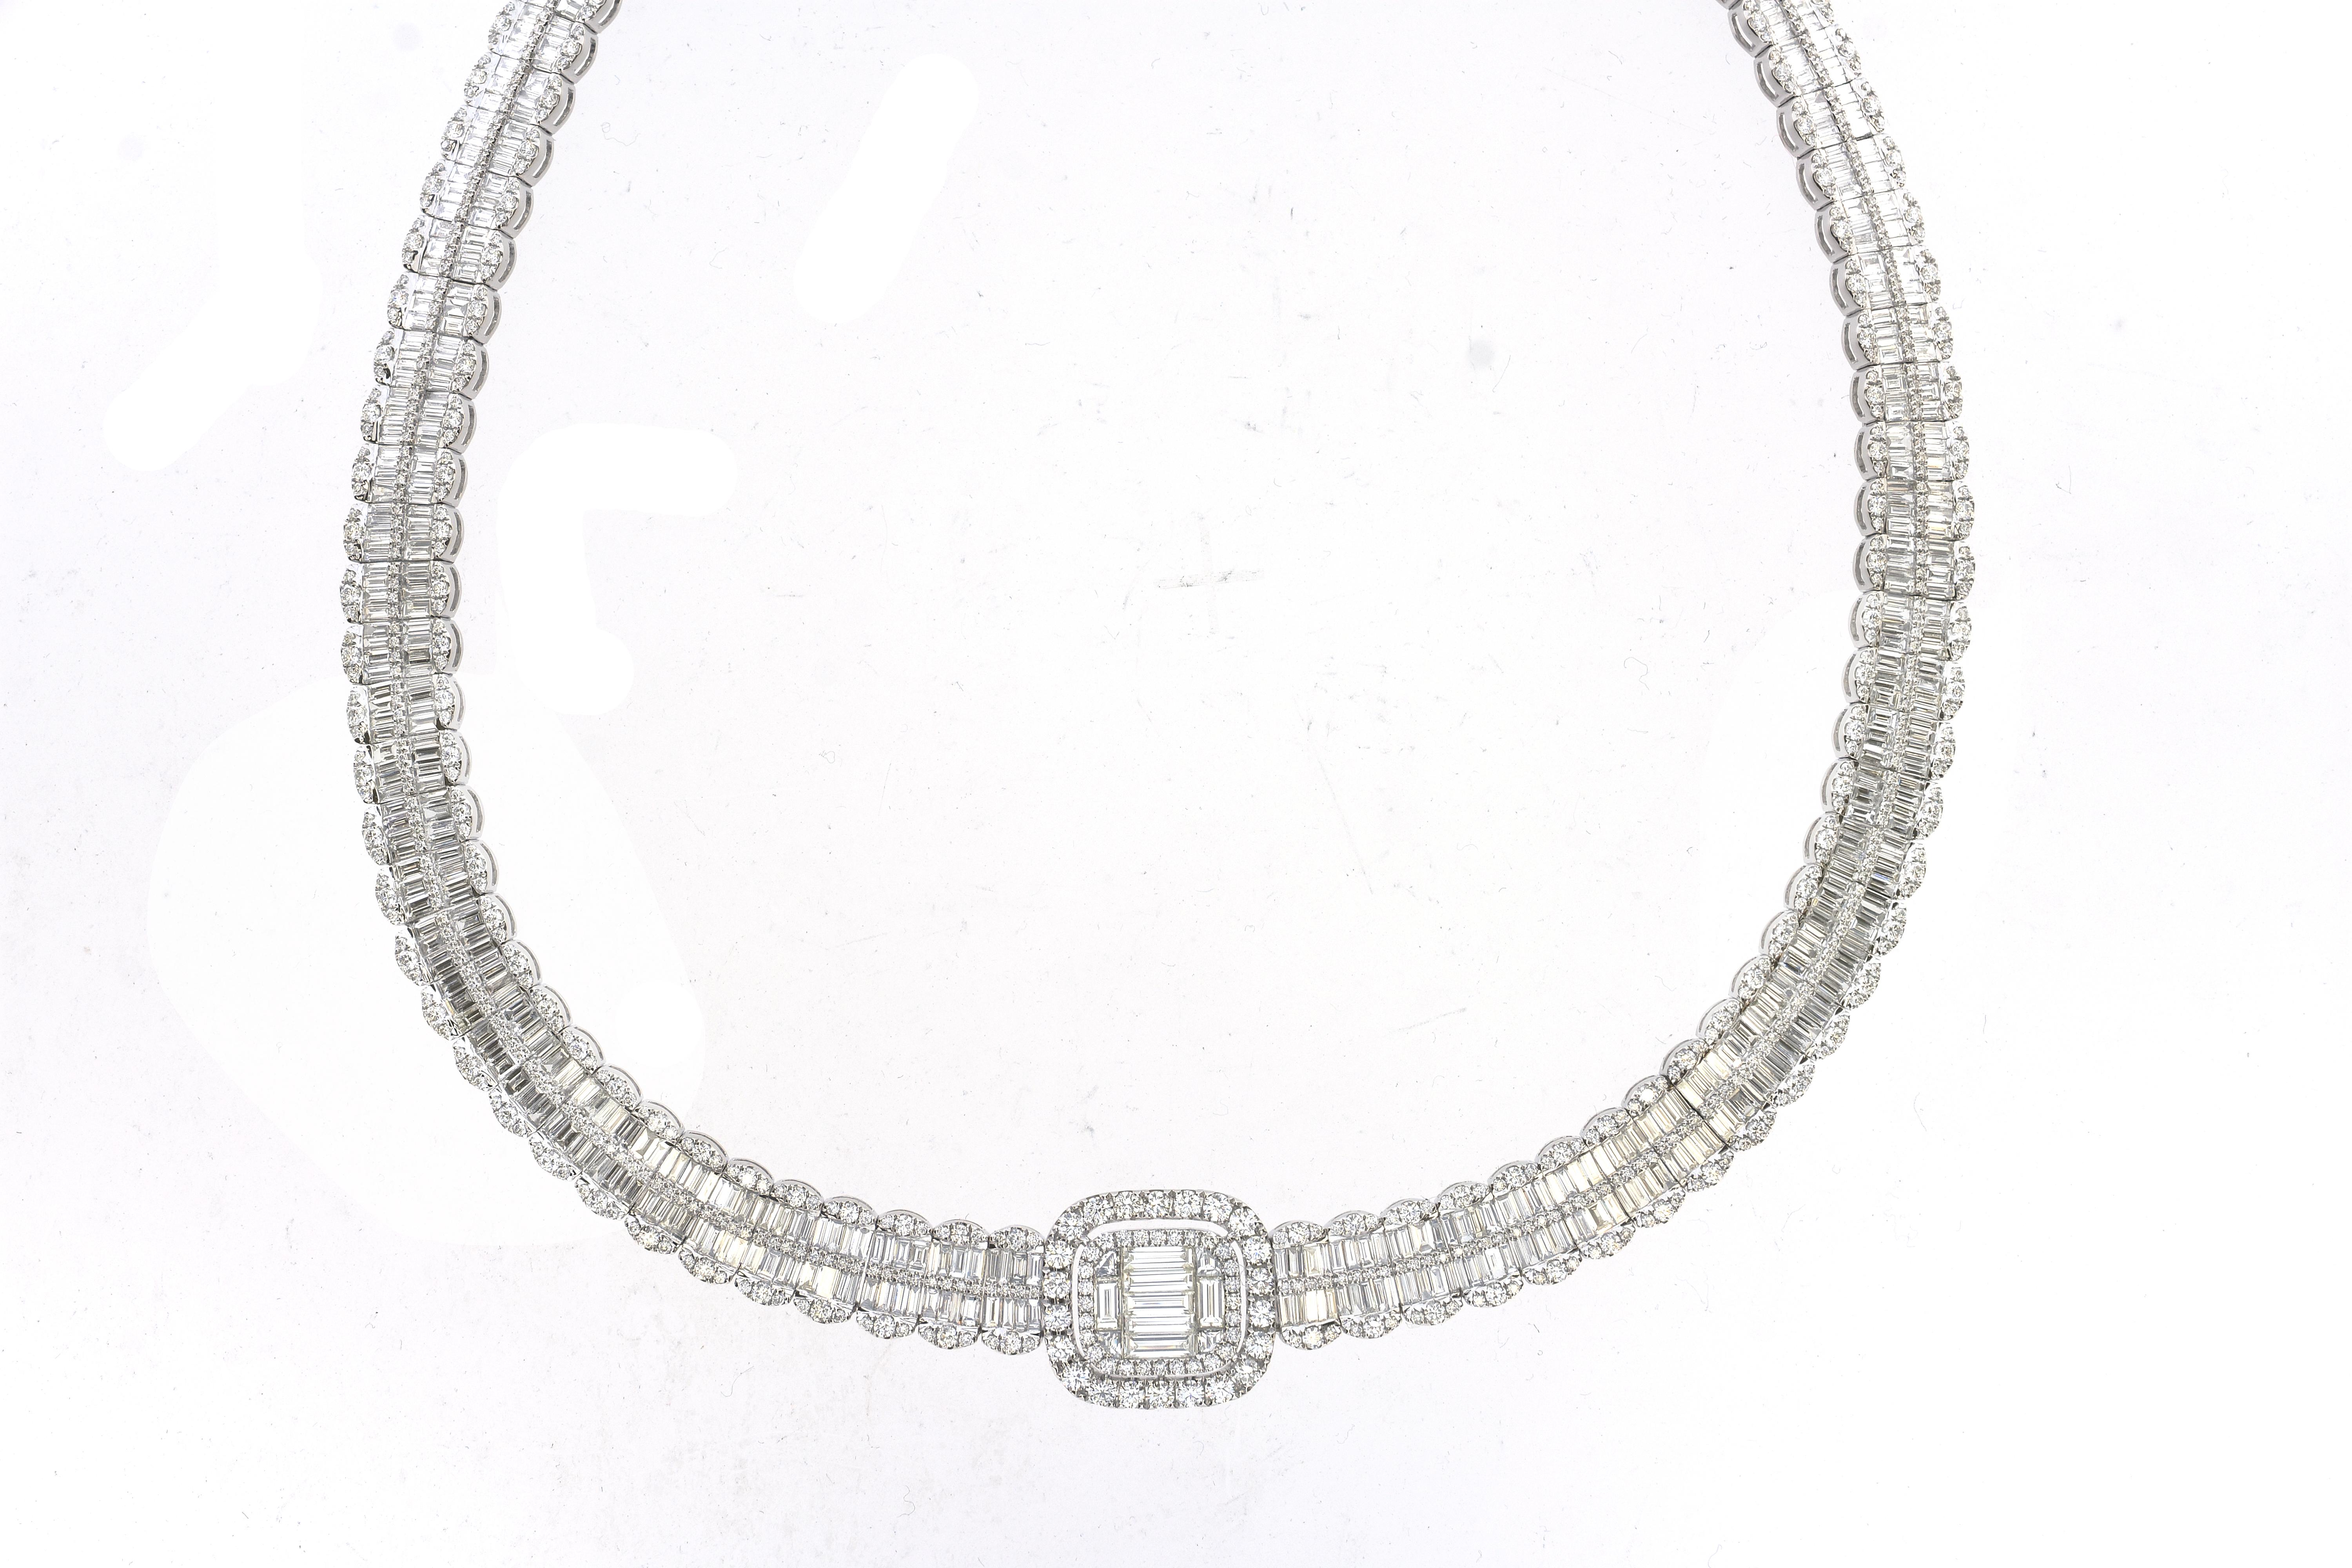 This exquisite and classy 30.68 Carat Baguette Diamond Necklace features 21.69 Carats of the finest cut Baguette White Diamonds and 8.99 Carats of Round White Diamonds. The Diamond Quality is all SI1 in Clarity and G-H in Color. This magnificent